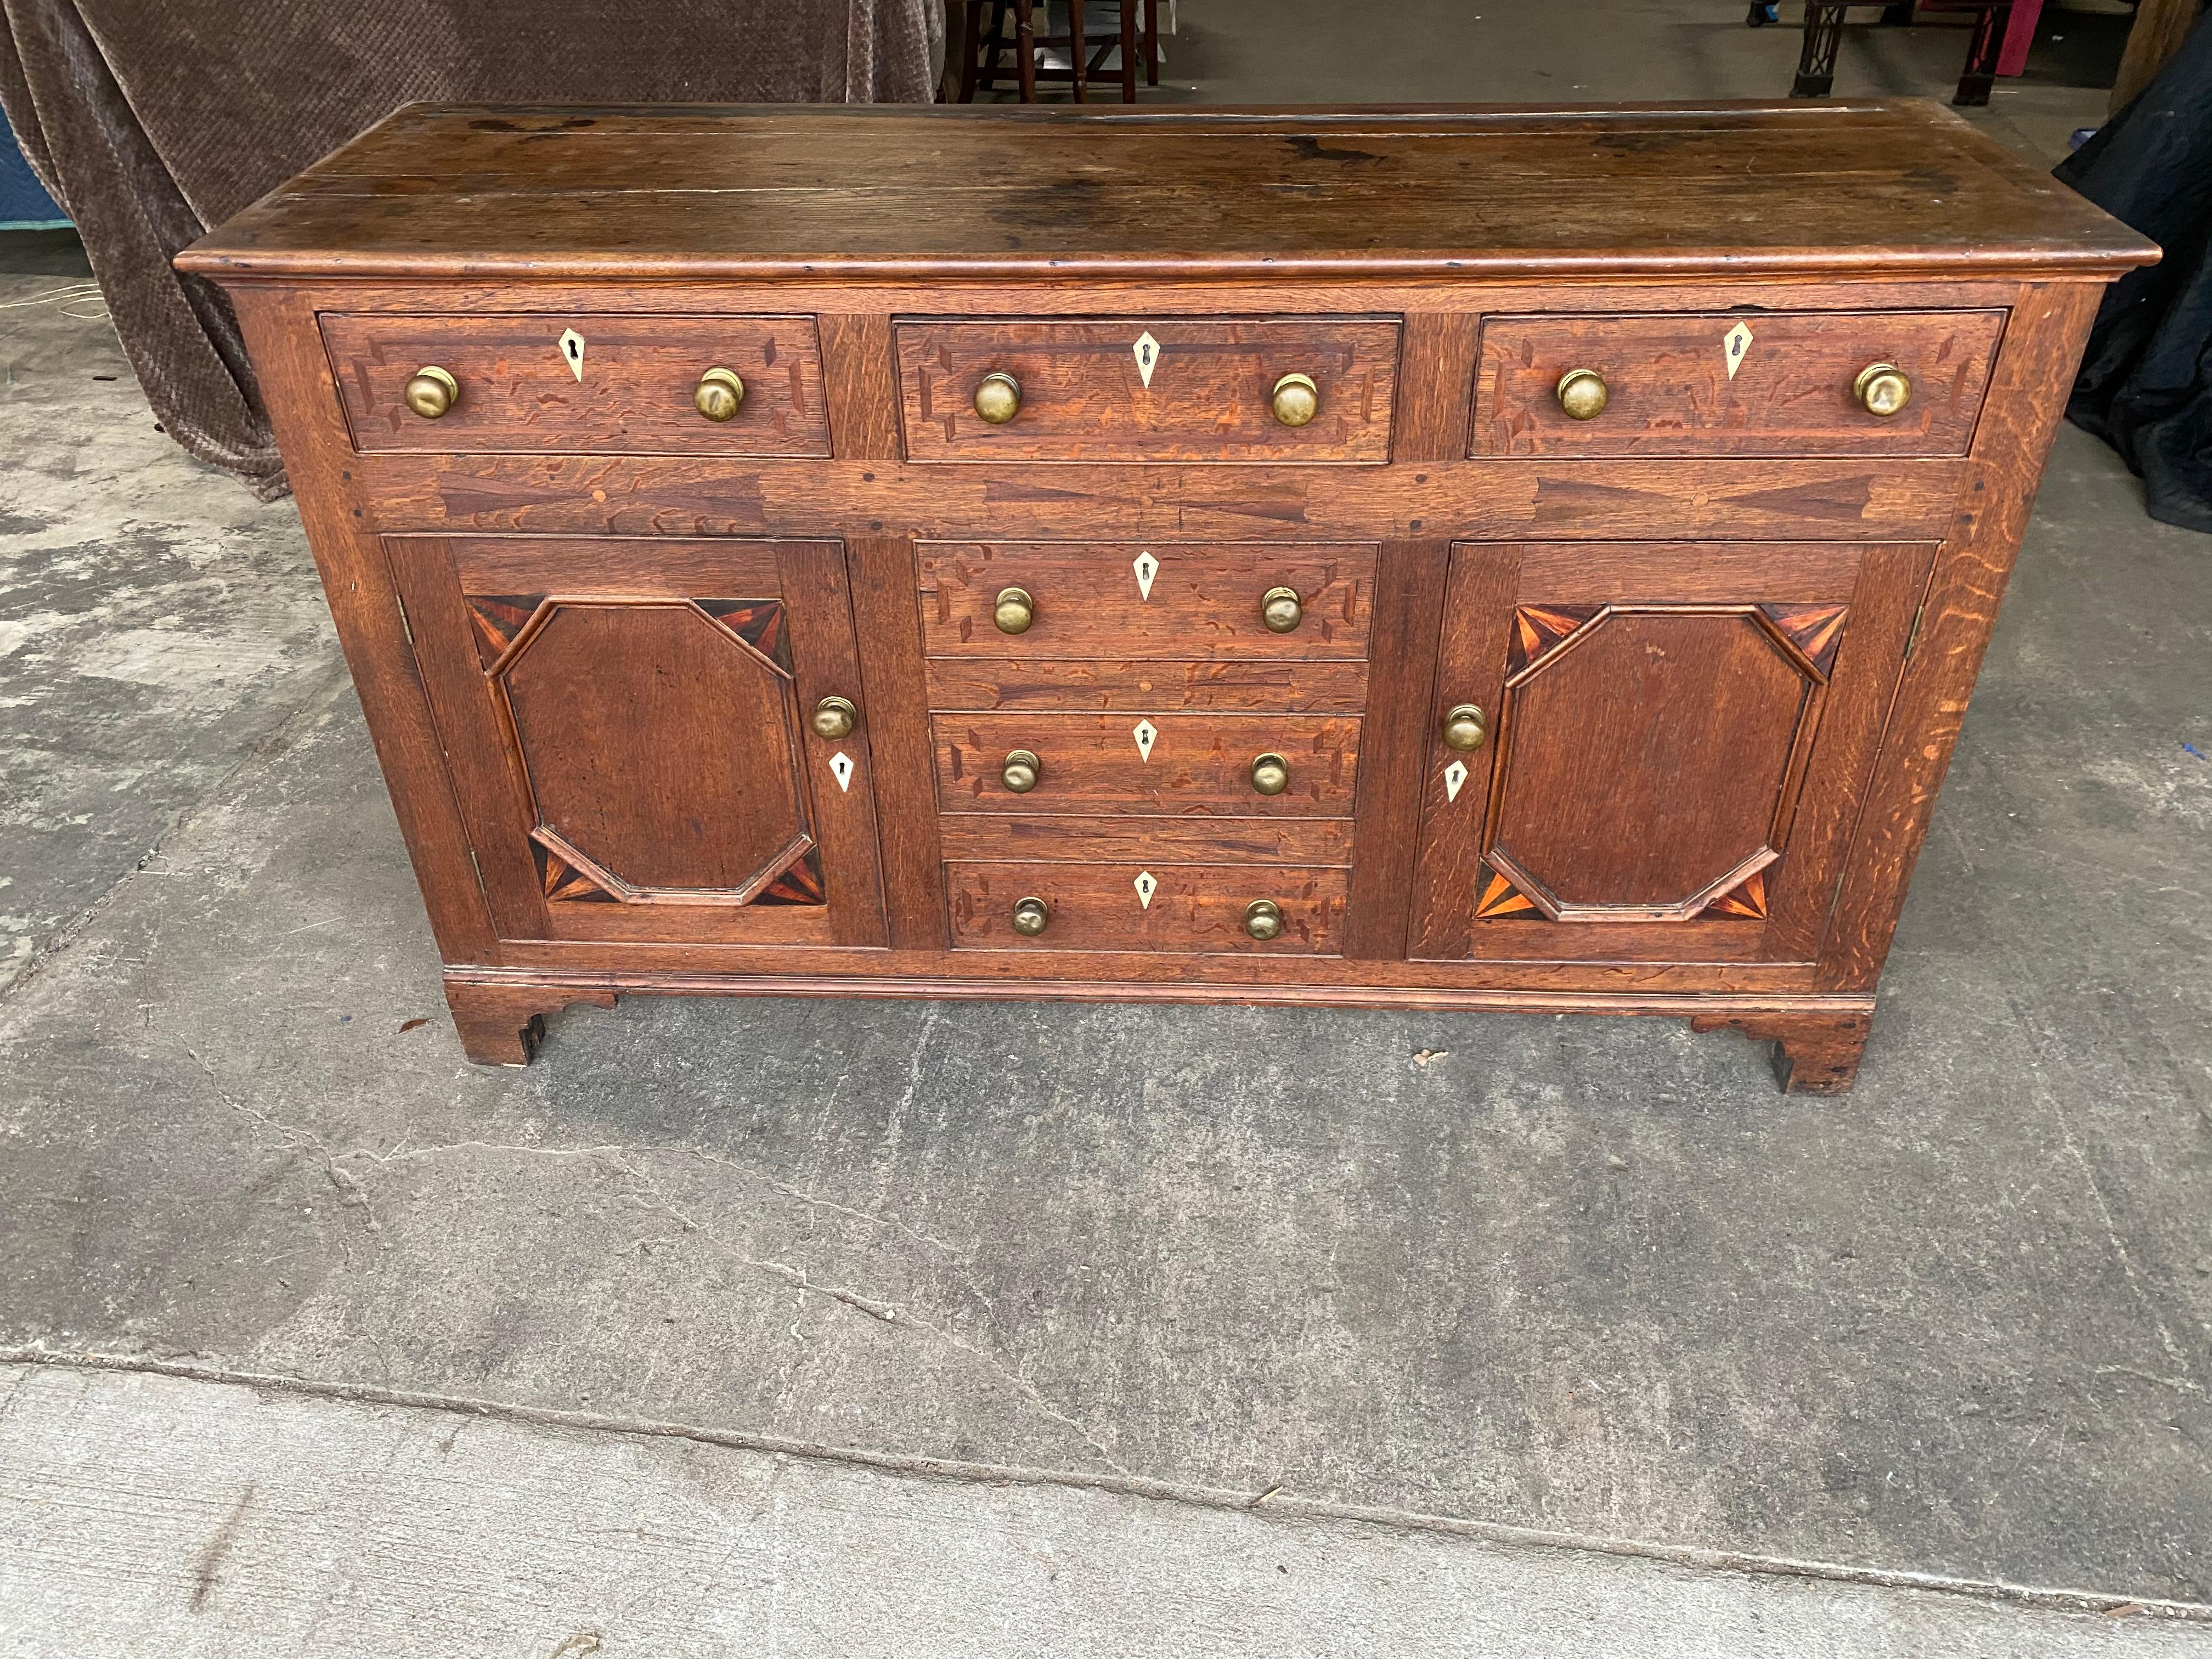 19th century inlaid Welsh oak dresser base with 3 drawers over 2 doors and 3 faux drawers. Inlaid eschuteons and doors. Very attractive patina and color.